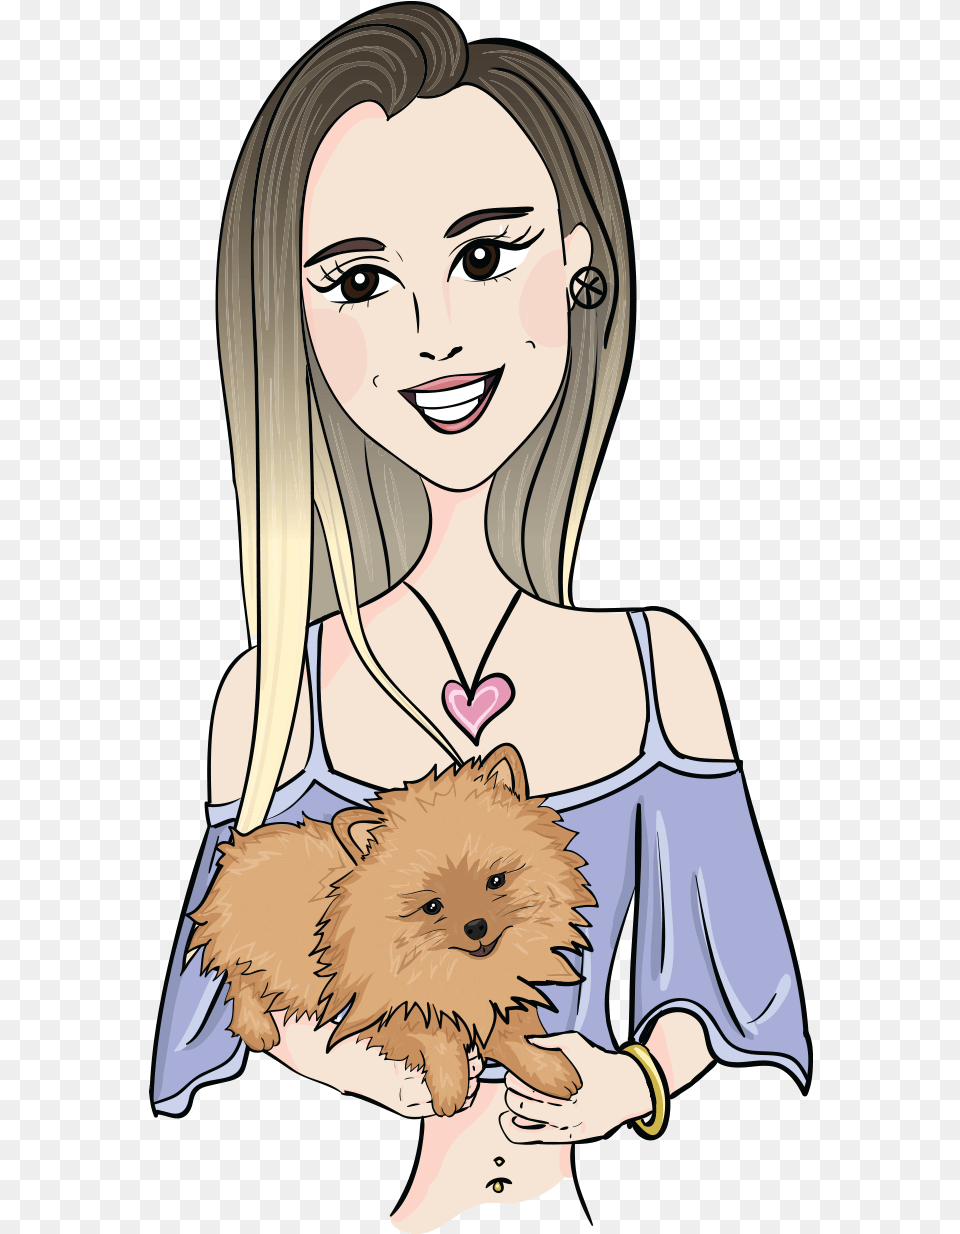 Cartoon Of A Pretty Girl Holding A Dog, Book, Comics, Publication, Adult Png Image